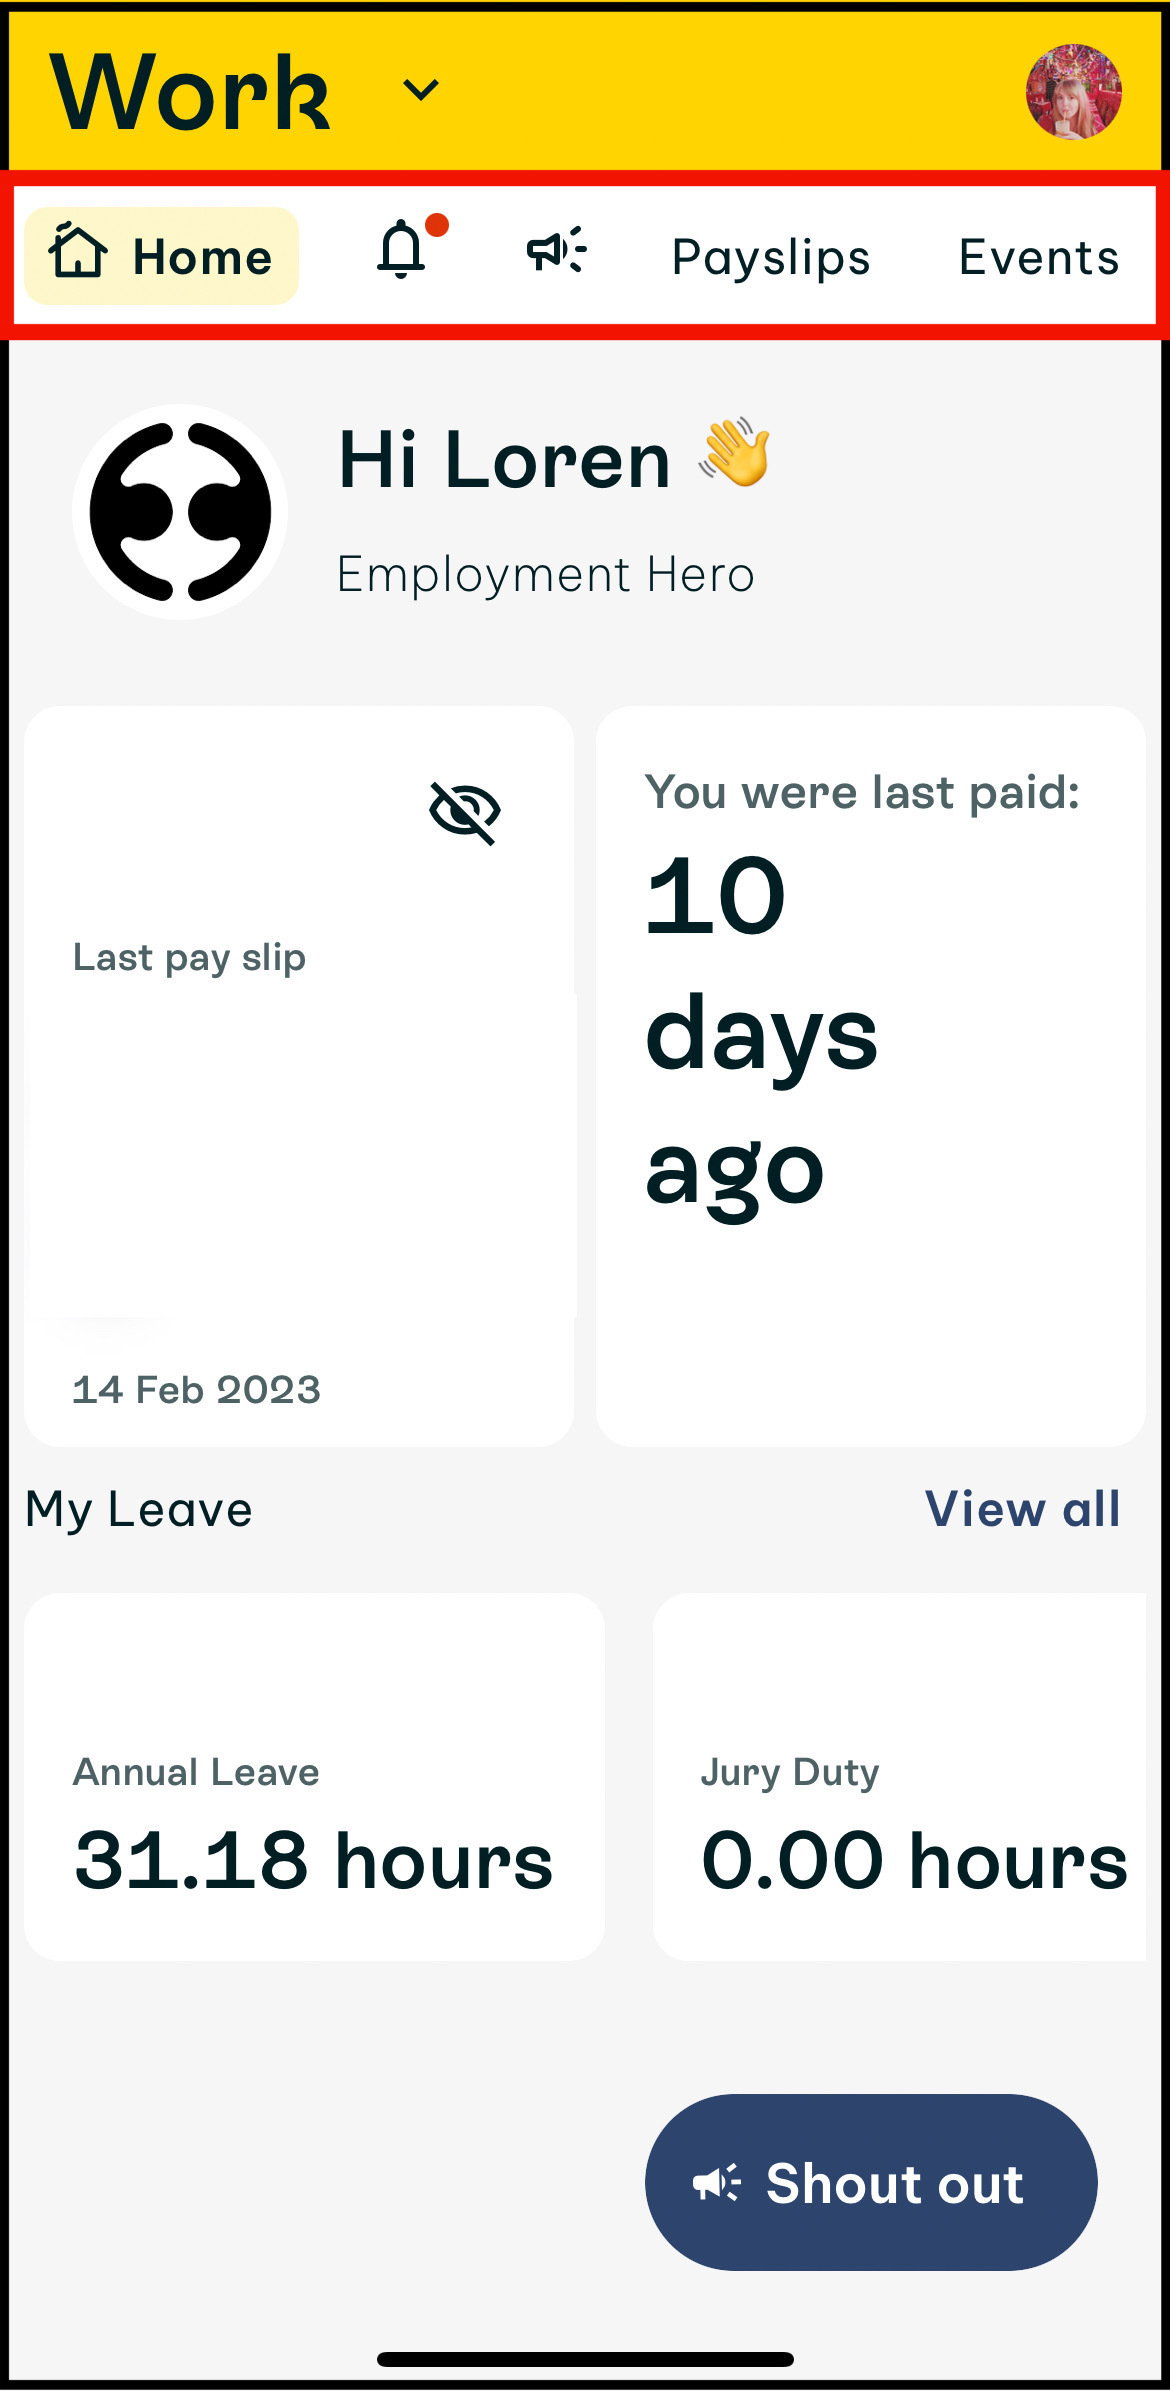 Screenshot of Work app in Swag showing the top bar showing from left to right: Home, bell icon for notifications, megaphone icon for company feed, payslips, then events. If you see this view when you tap on Work in Swag, that means that your employer is using HRIS software.